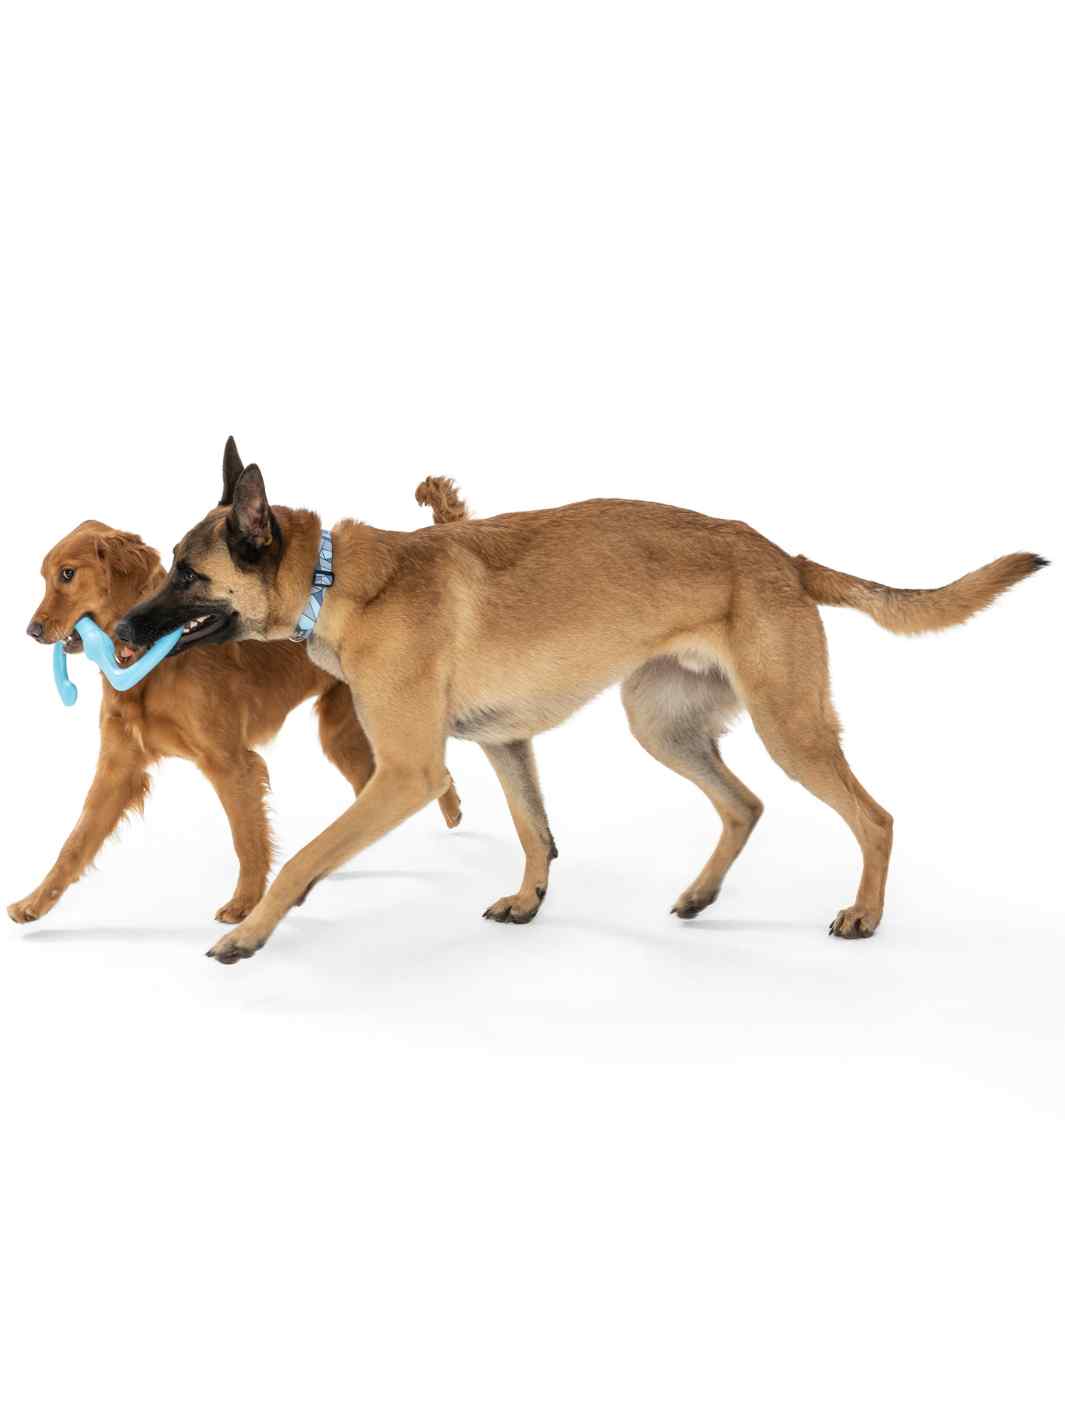 A German Shepherd and a Golden Retriever playing tug with a  West Paw Bumi dog toy